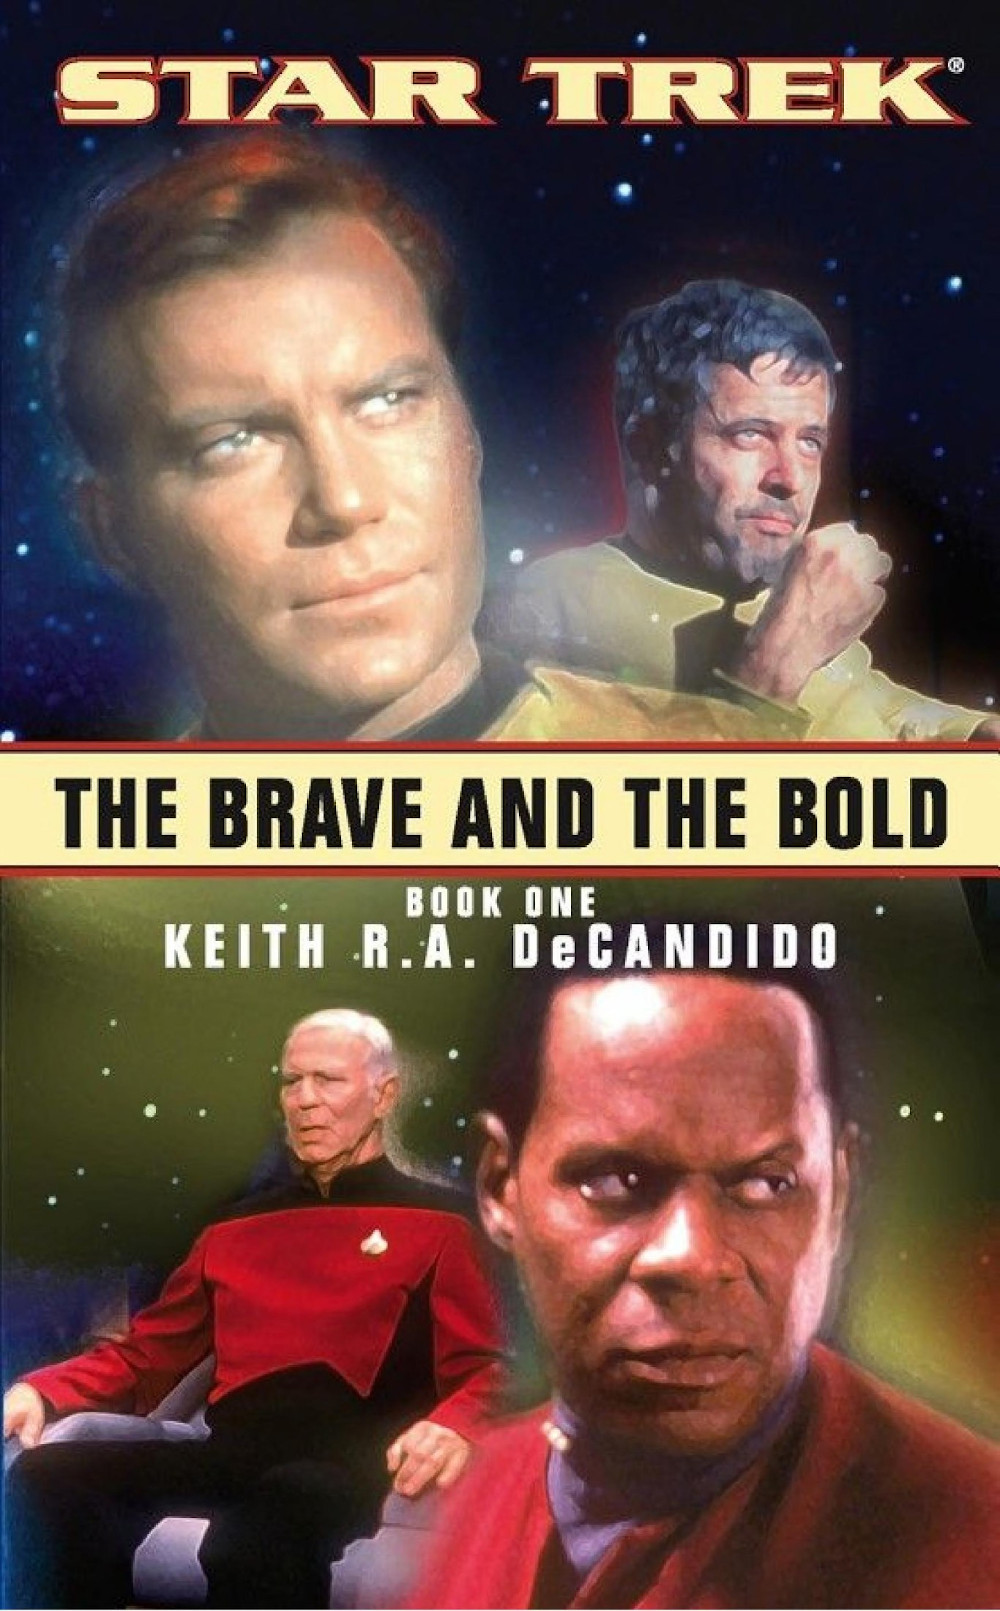 The Brave and the Bold, Book One (Dec 2002)